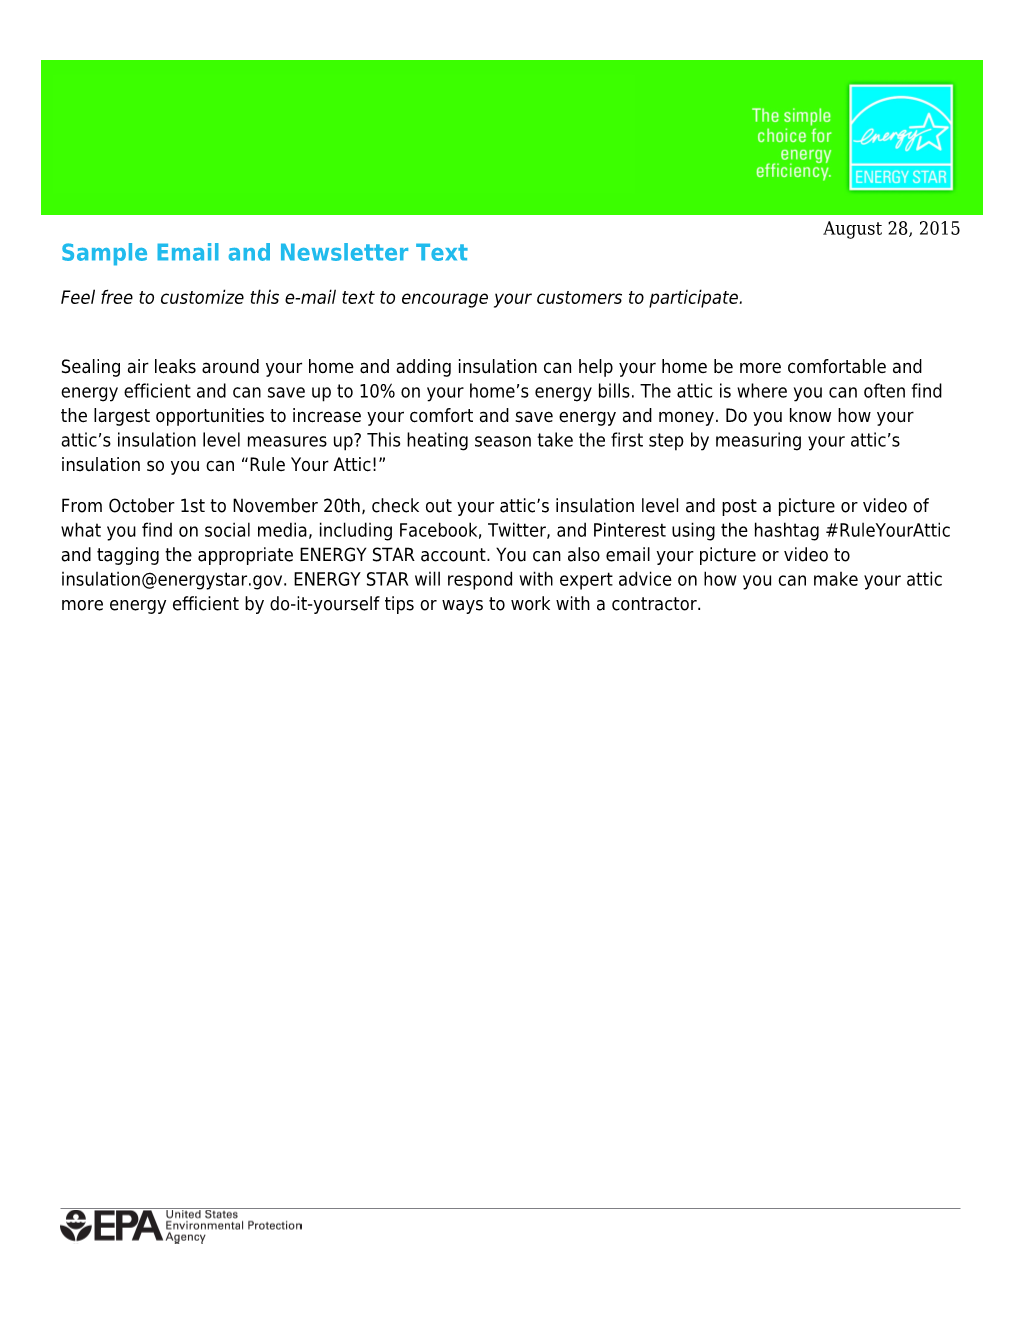 Sample Email and Newsletter Text